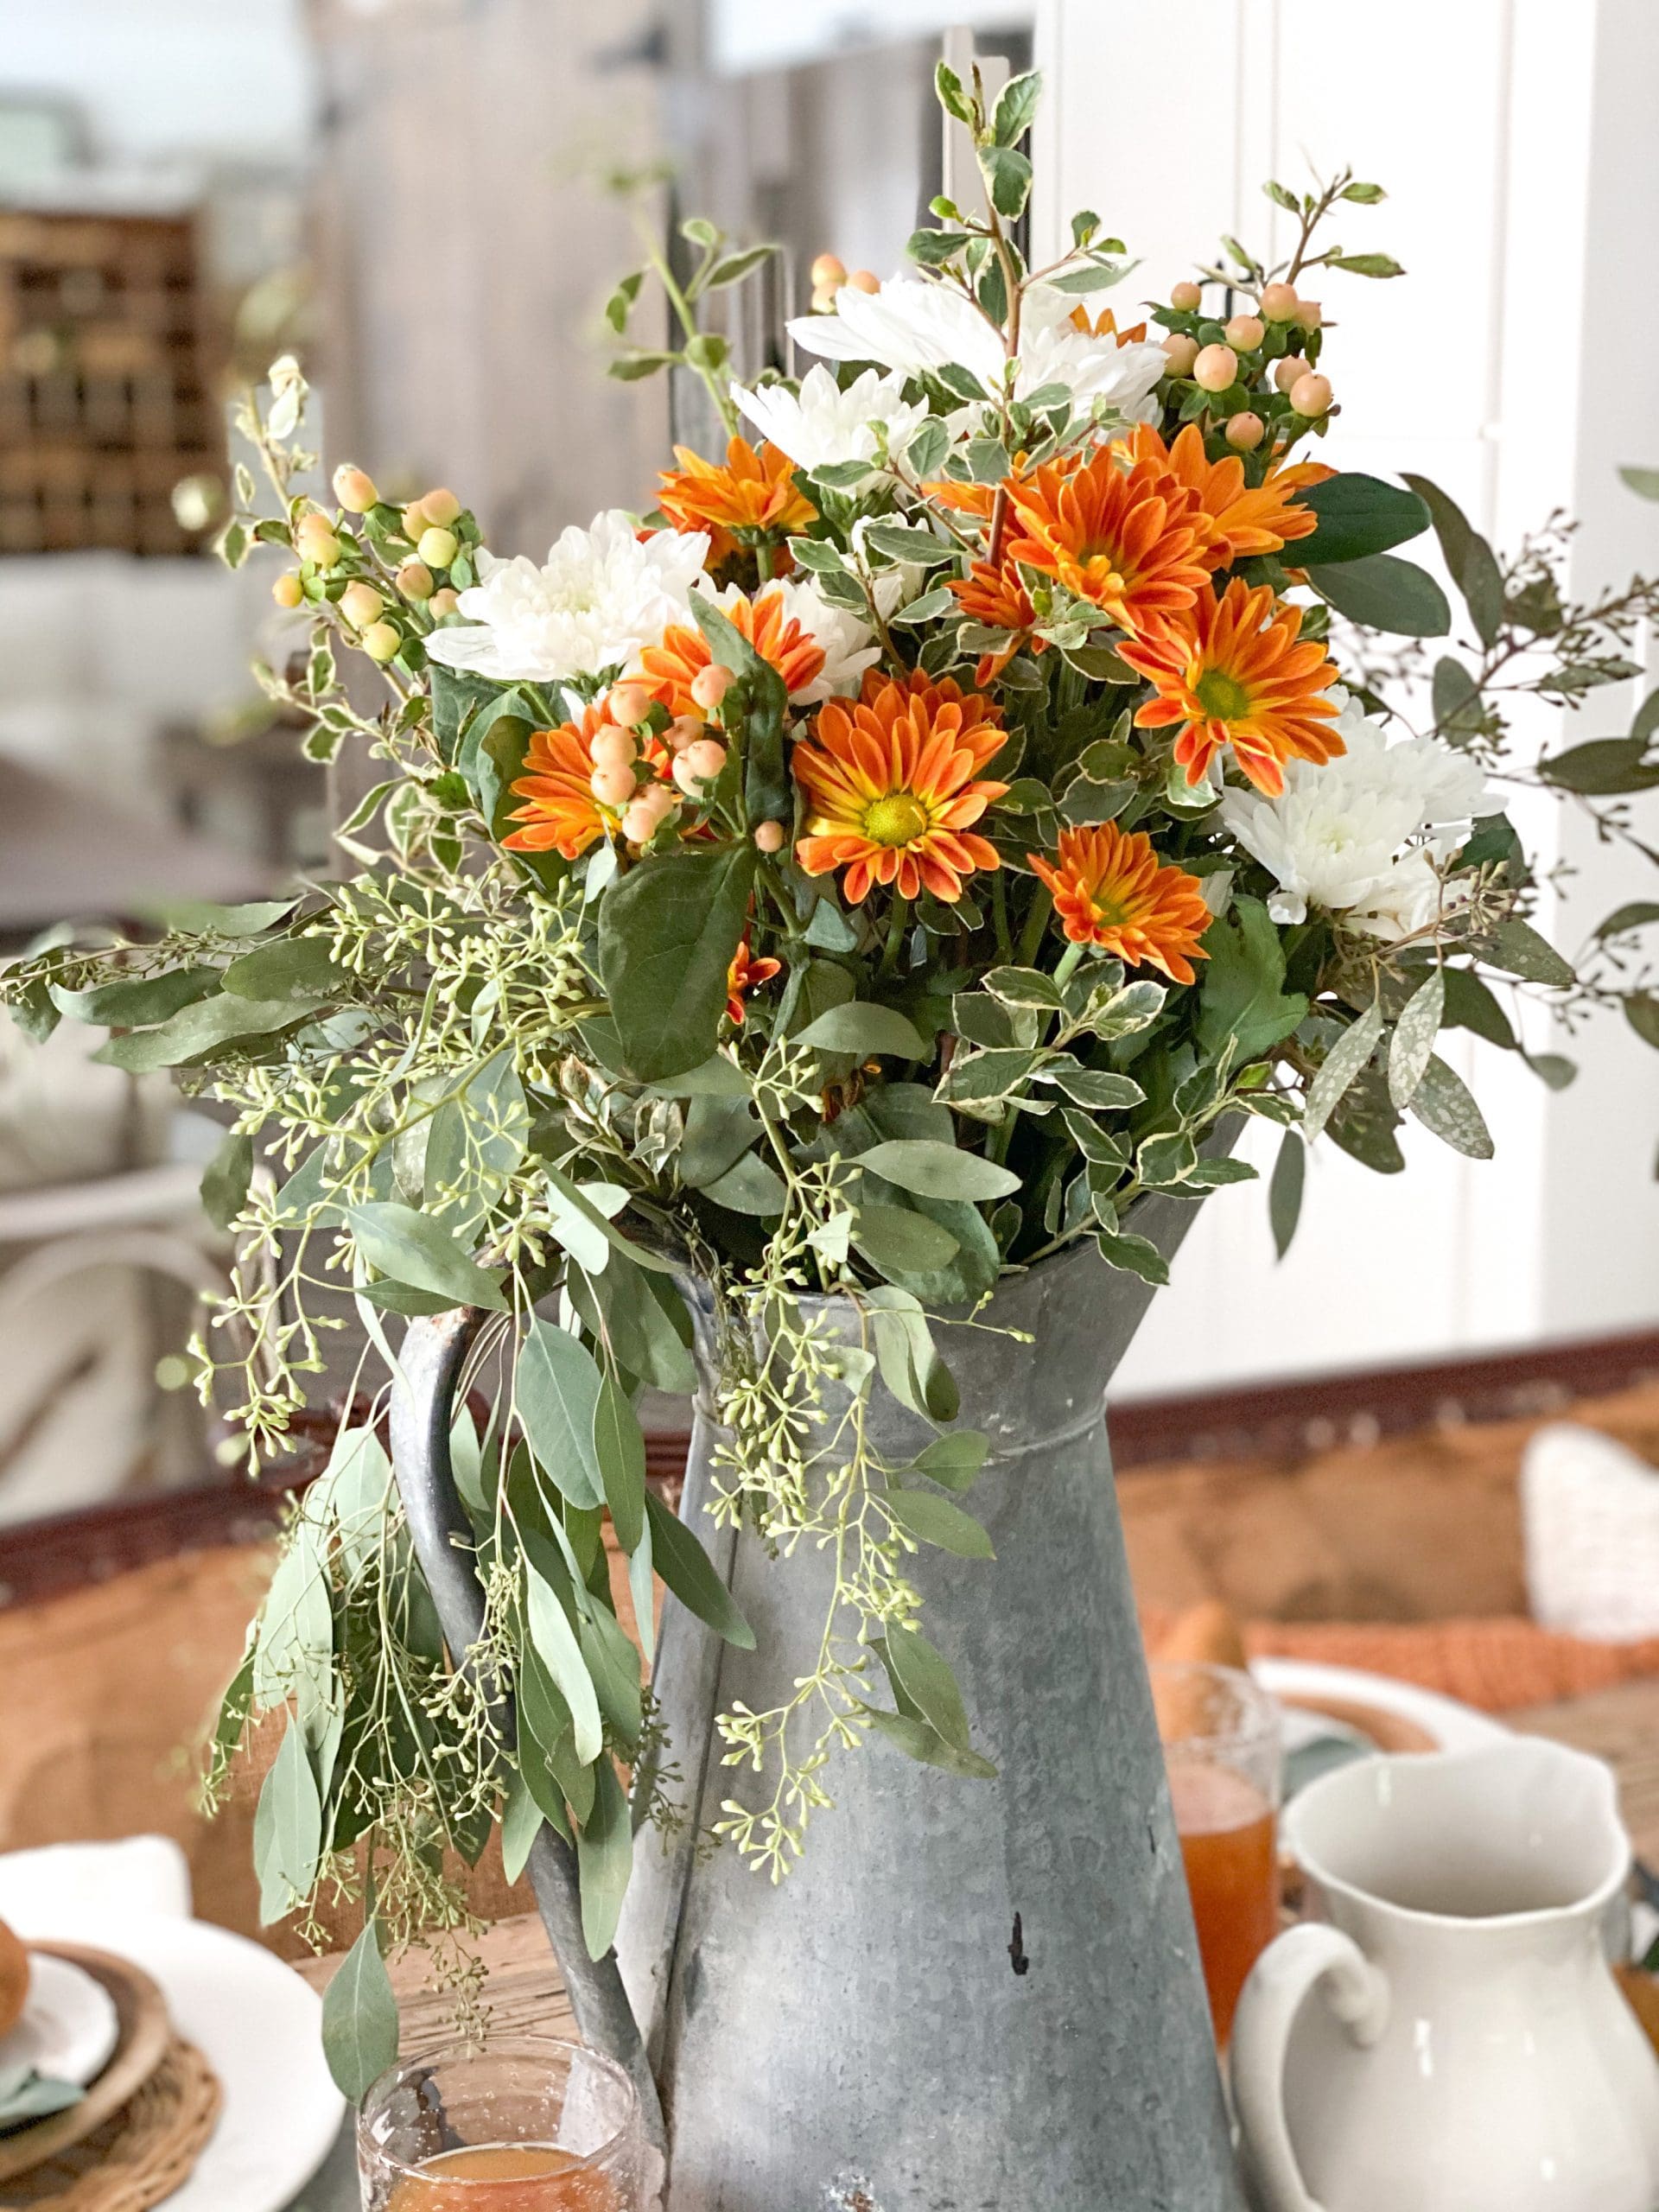 7 Easy Ways to Make Your DIY Fall Flowers Amazing